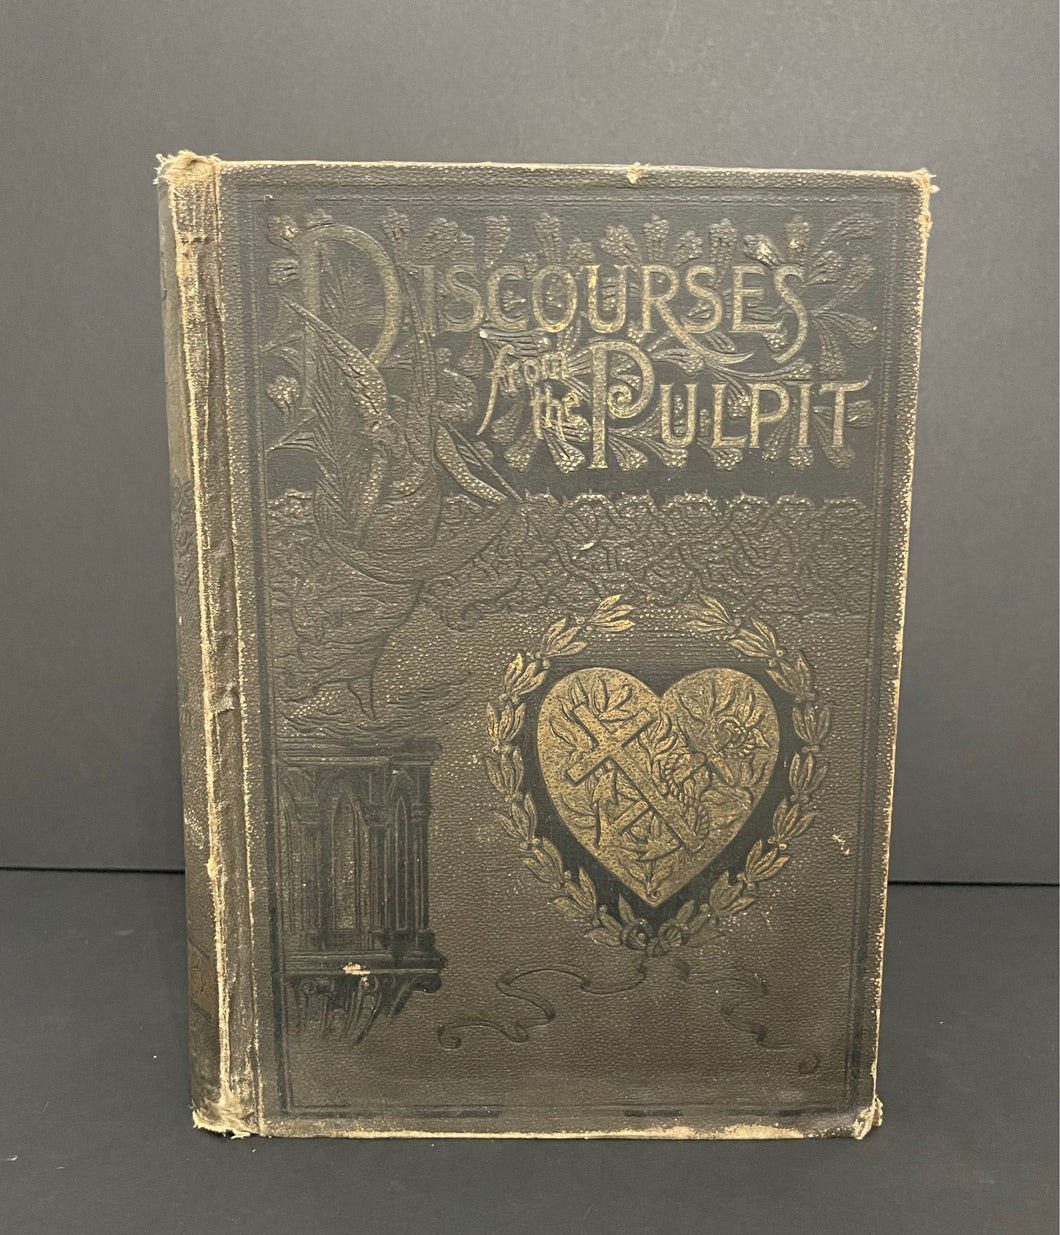 Antique 1891 “Discourse From the Pulpit” Book